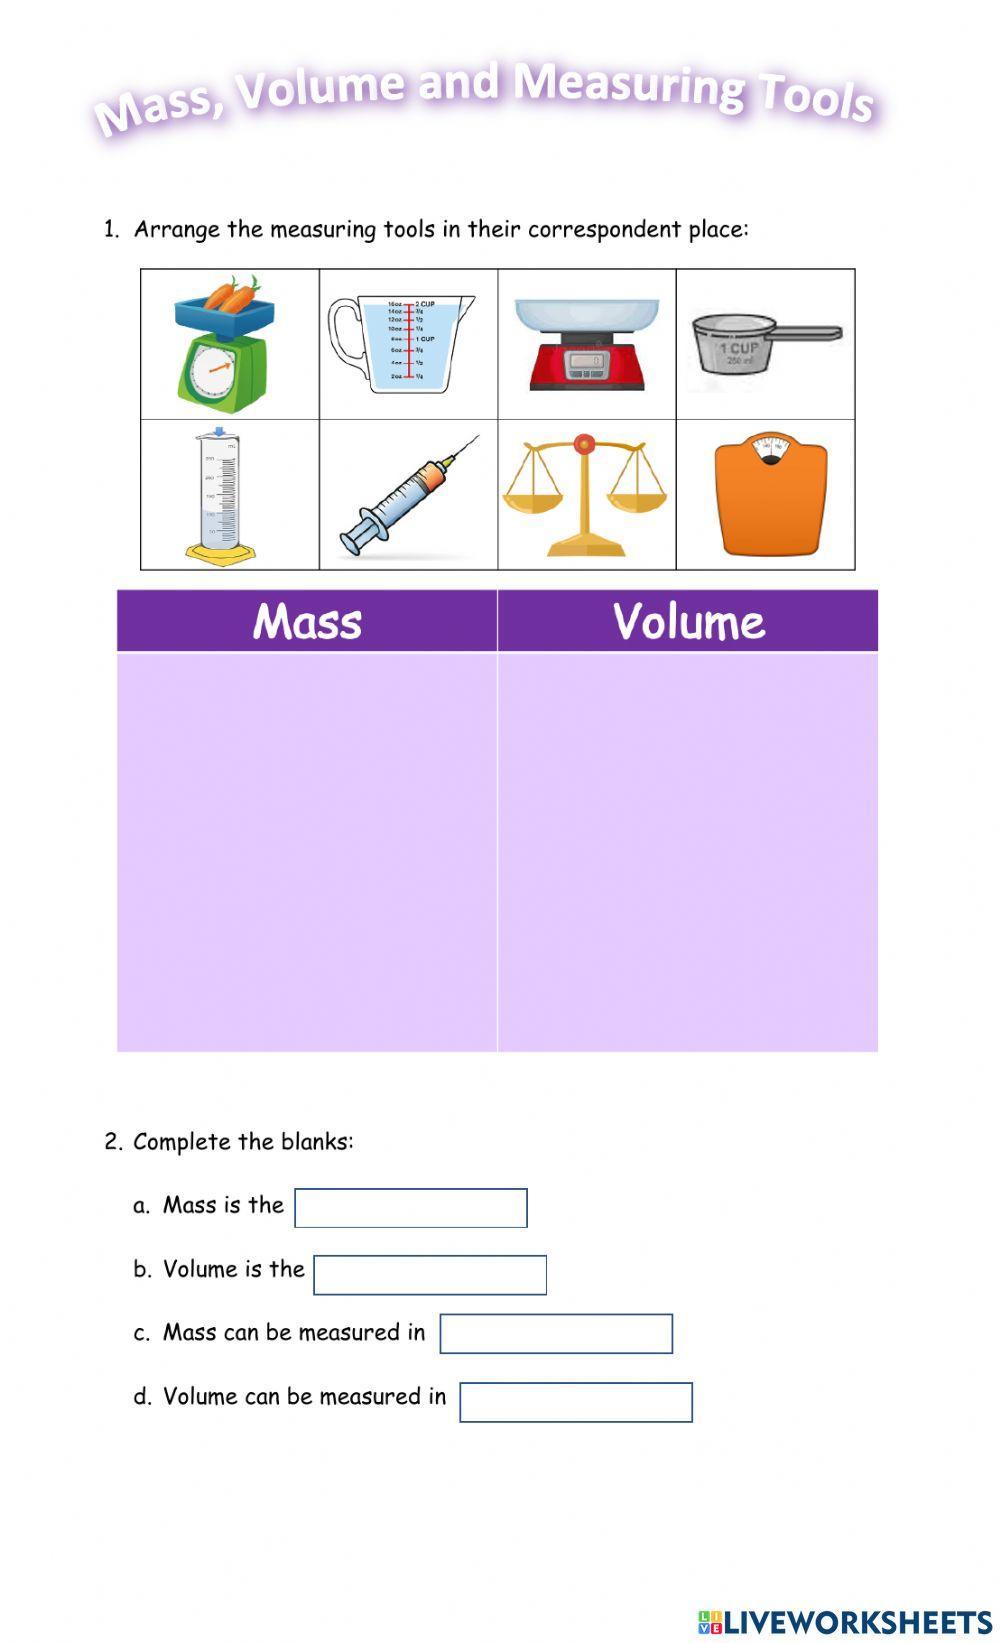 Measuring mass and volume